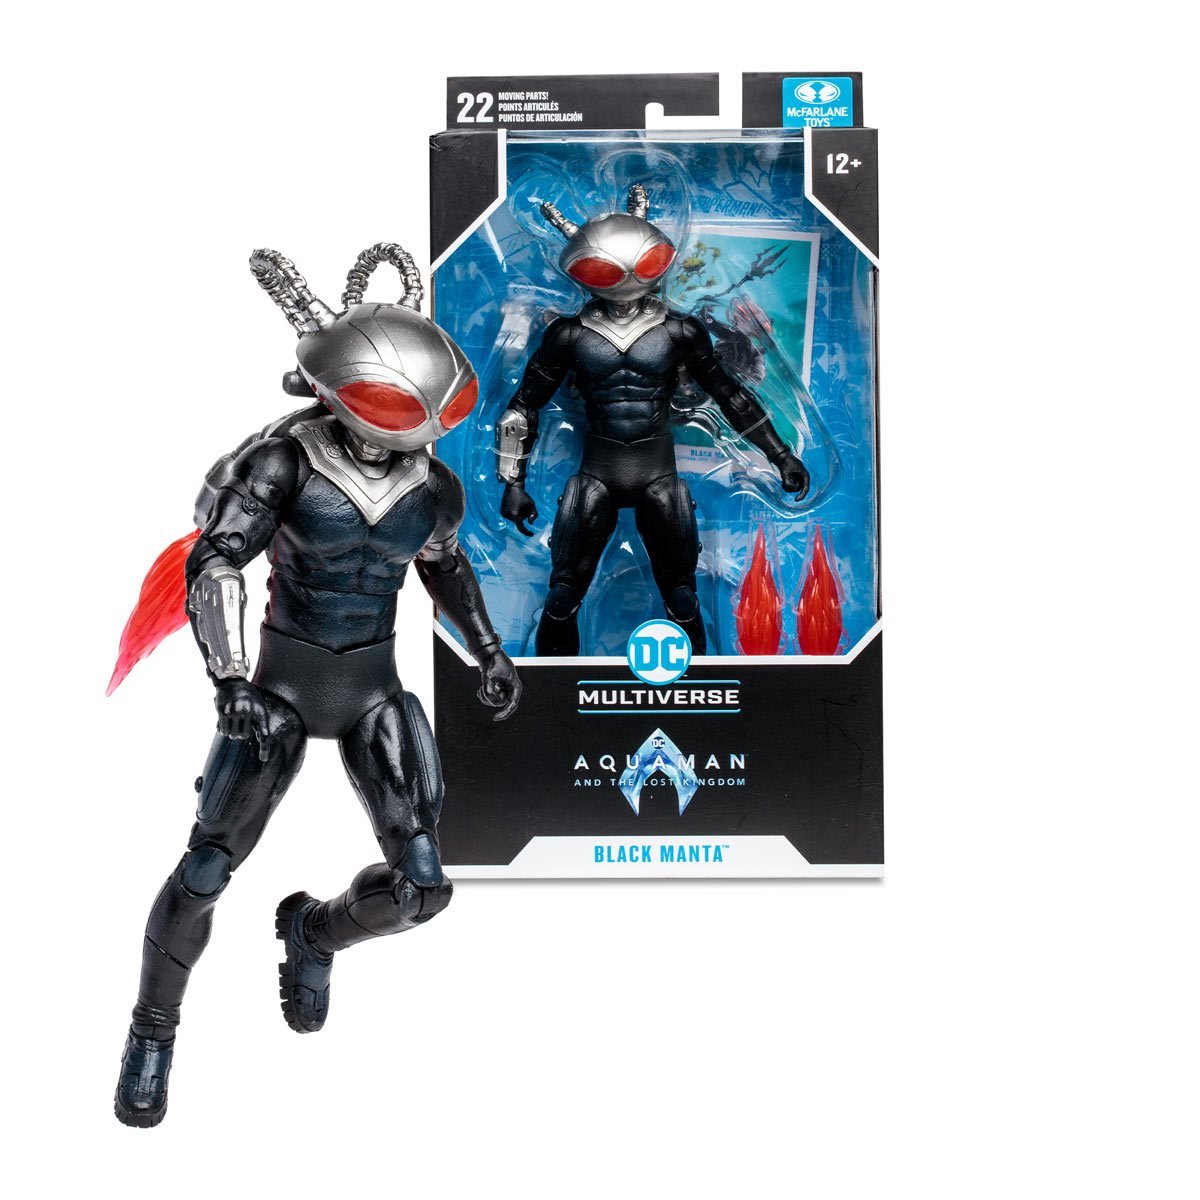 MCFARLANE DC Multiverse Aquaman and the Lost Kingdom Movie Black Manta 7-Inch Scale Action Figure